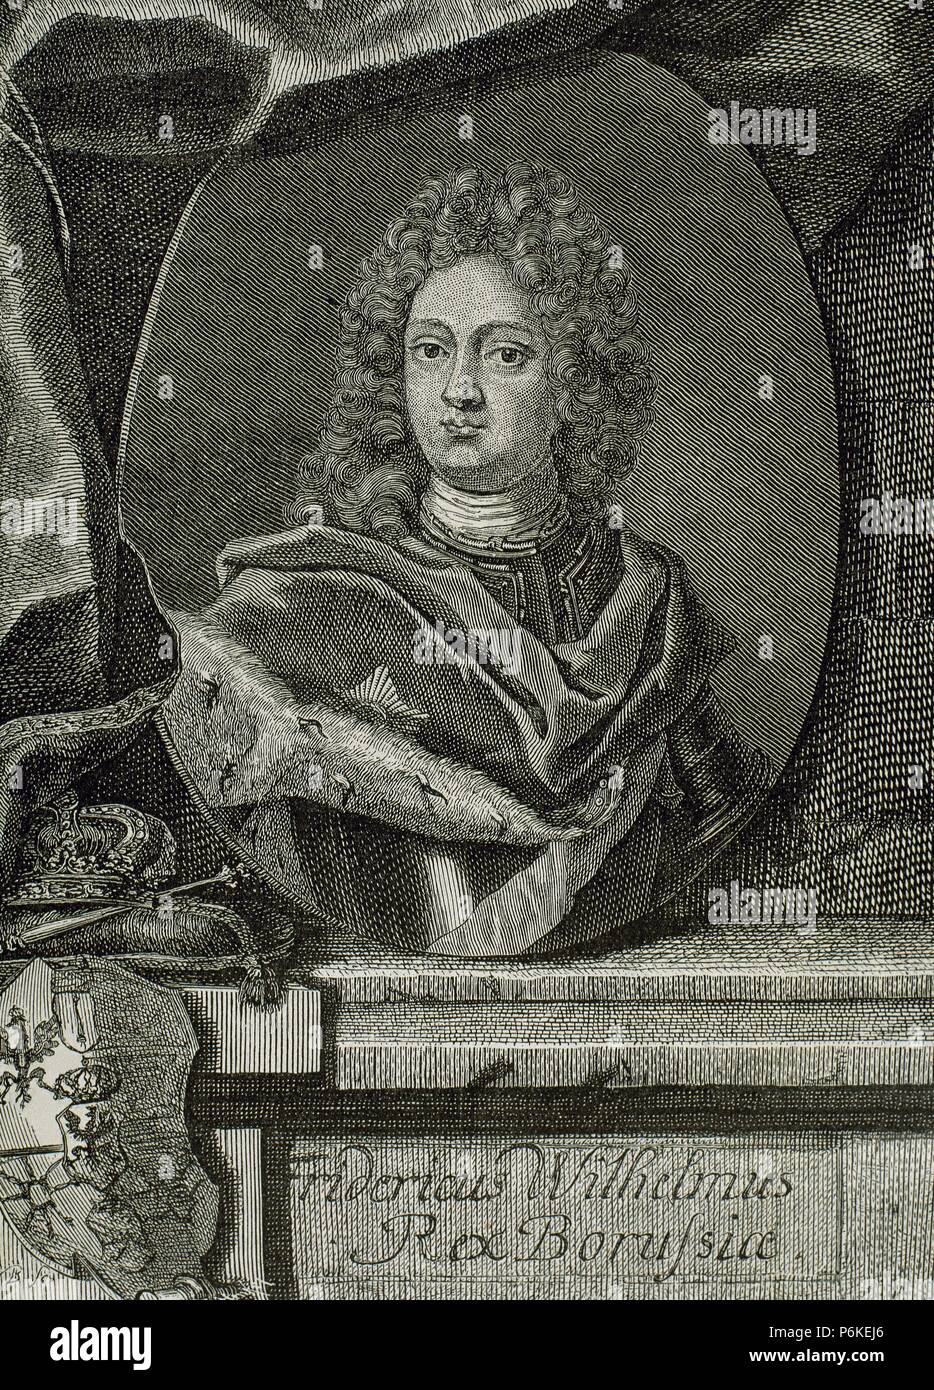 Frederick William I of Prussia(1688-1740). Known as the Soldier King. King in Prussia and Elector of Brandenburg. Engraving by M. Bernigeroth. 19th century. Stock Photo